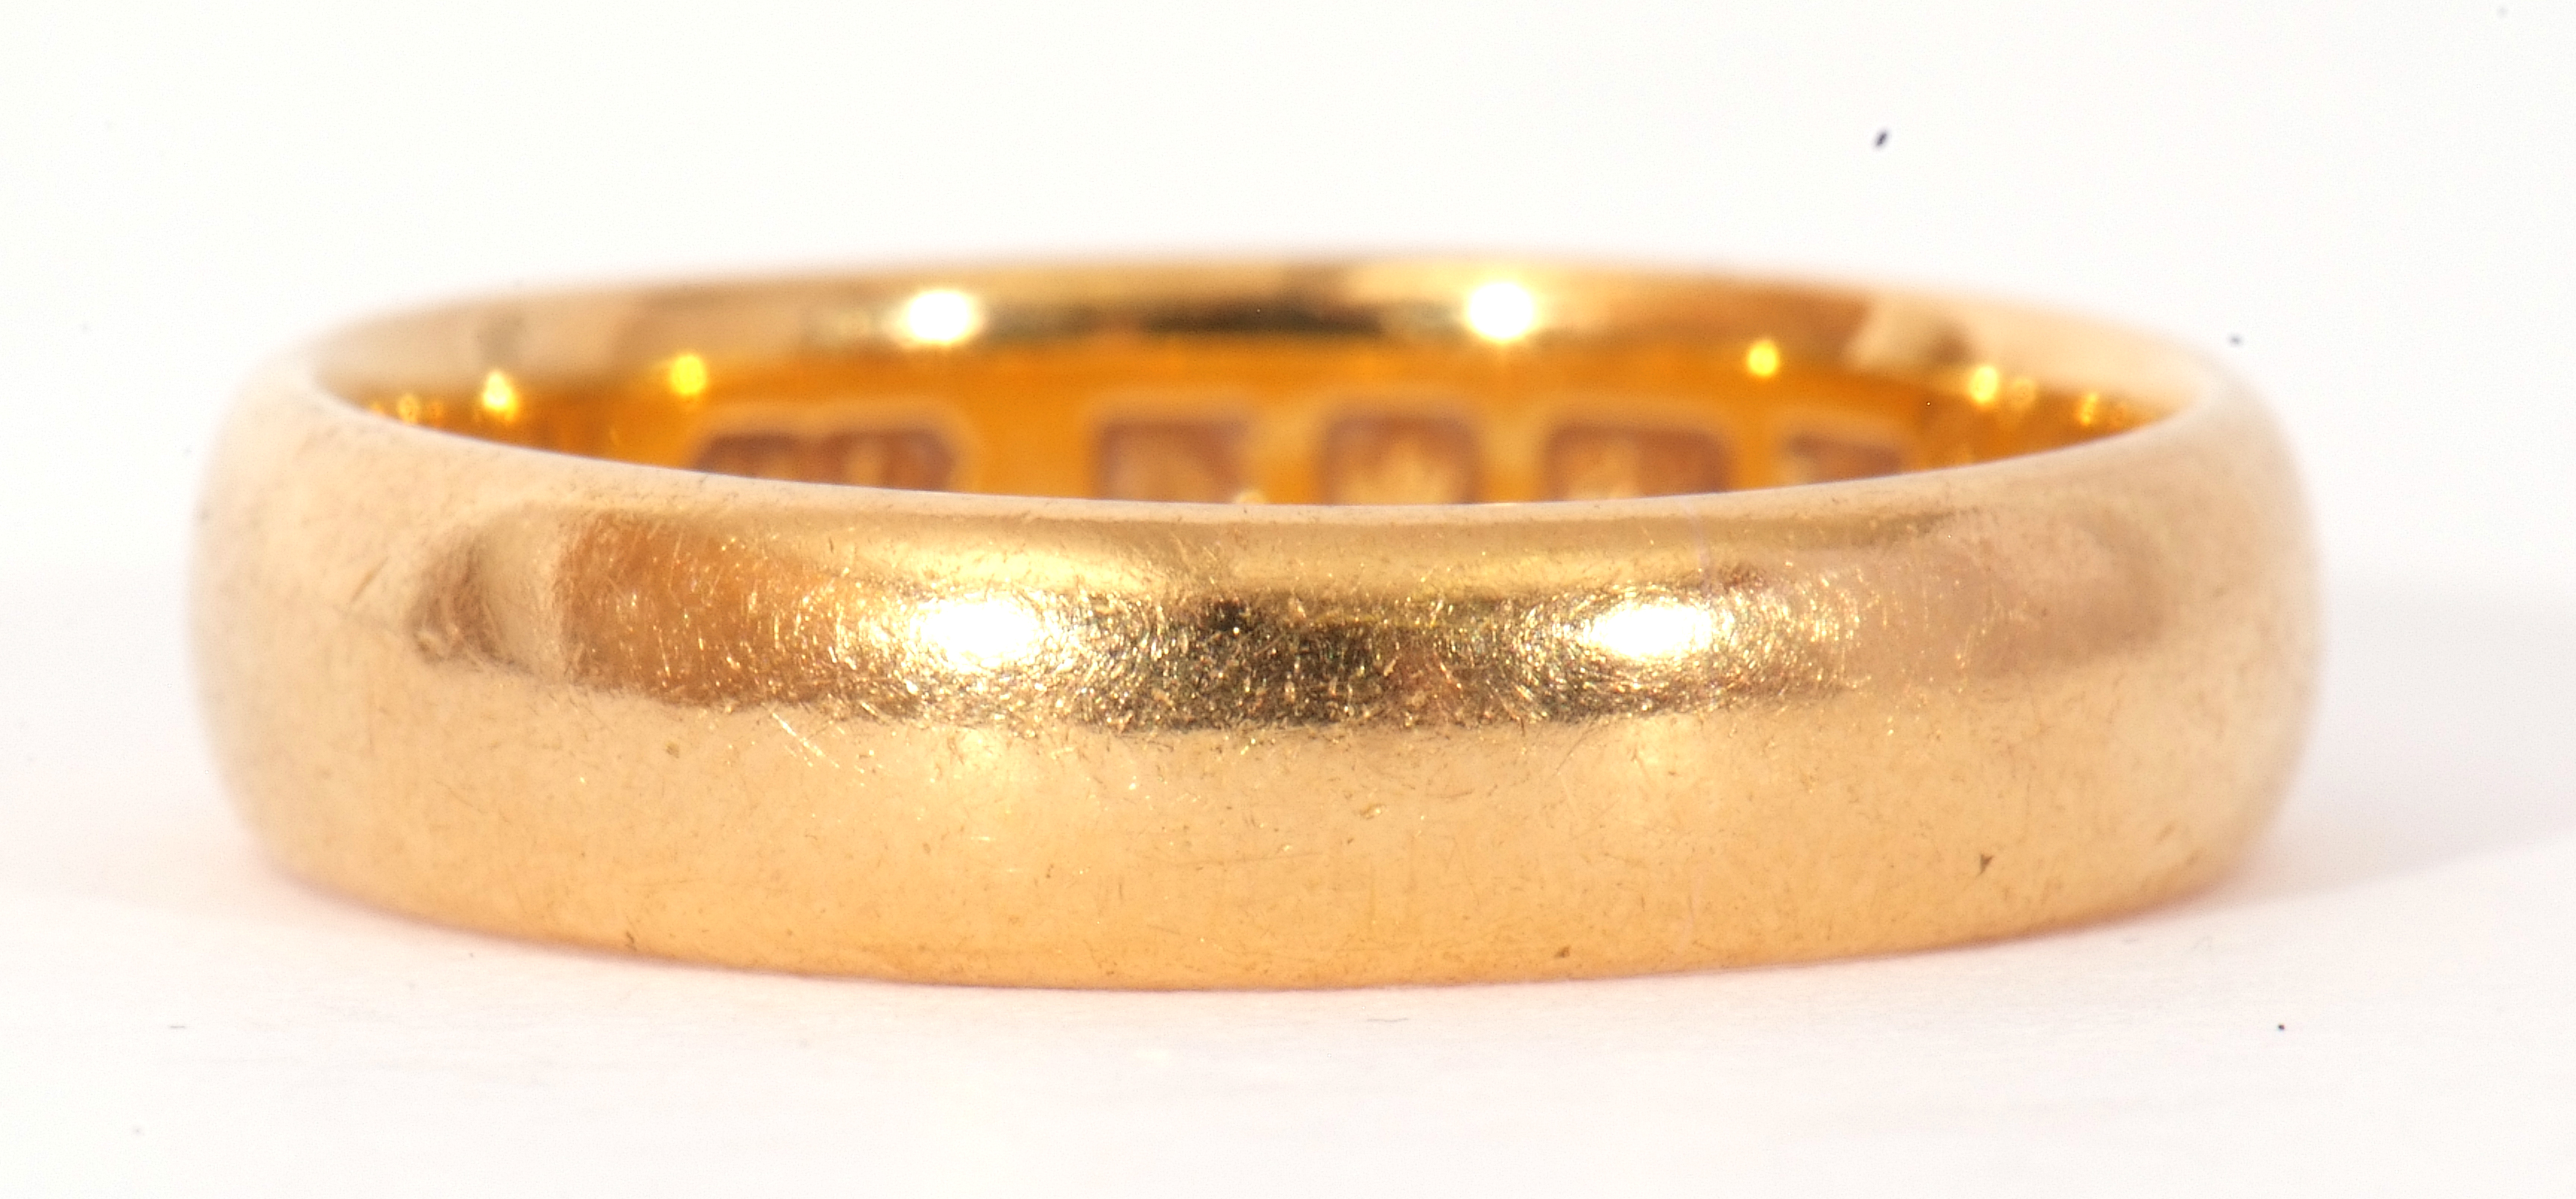 Early 20th century 22ct gold wedding ring, plain polished design, 6.7gms, London 1927, size P - Image 2 of 3